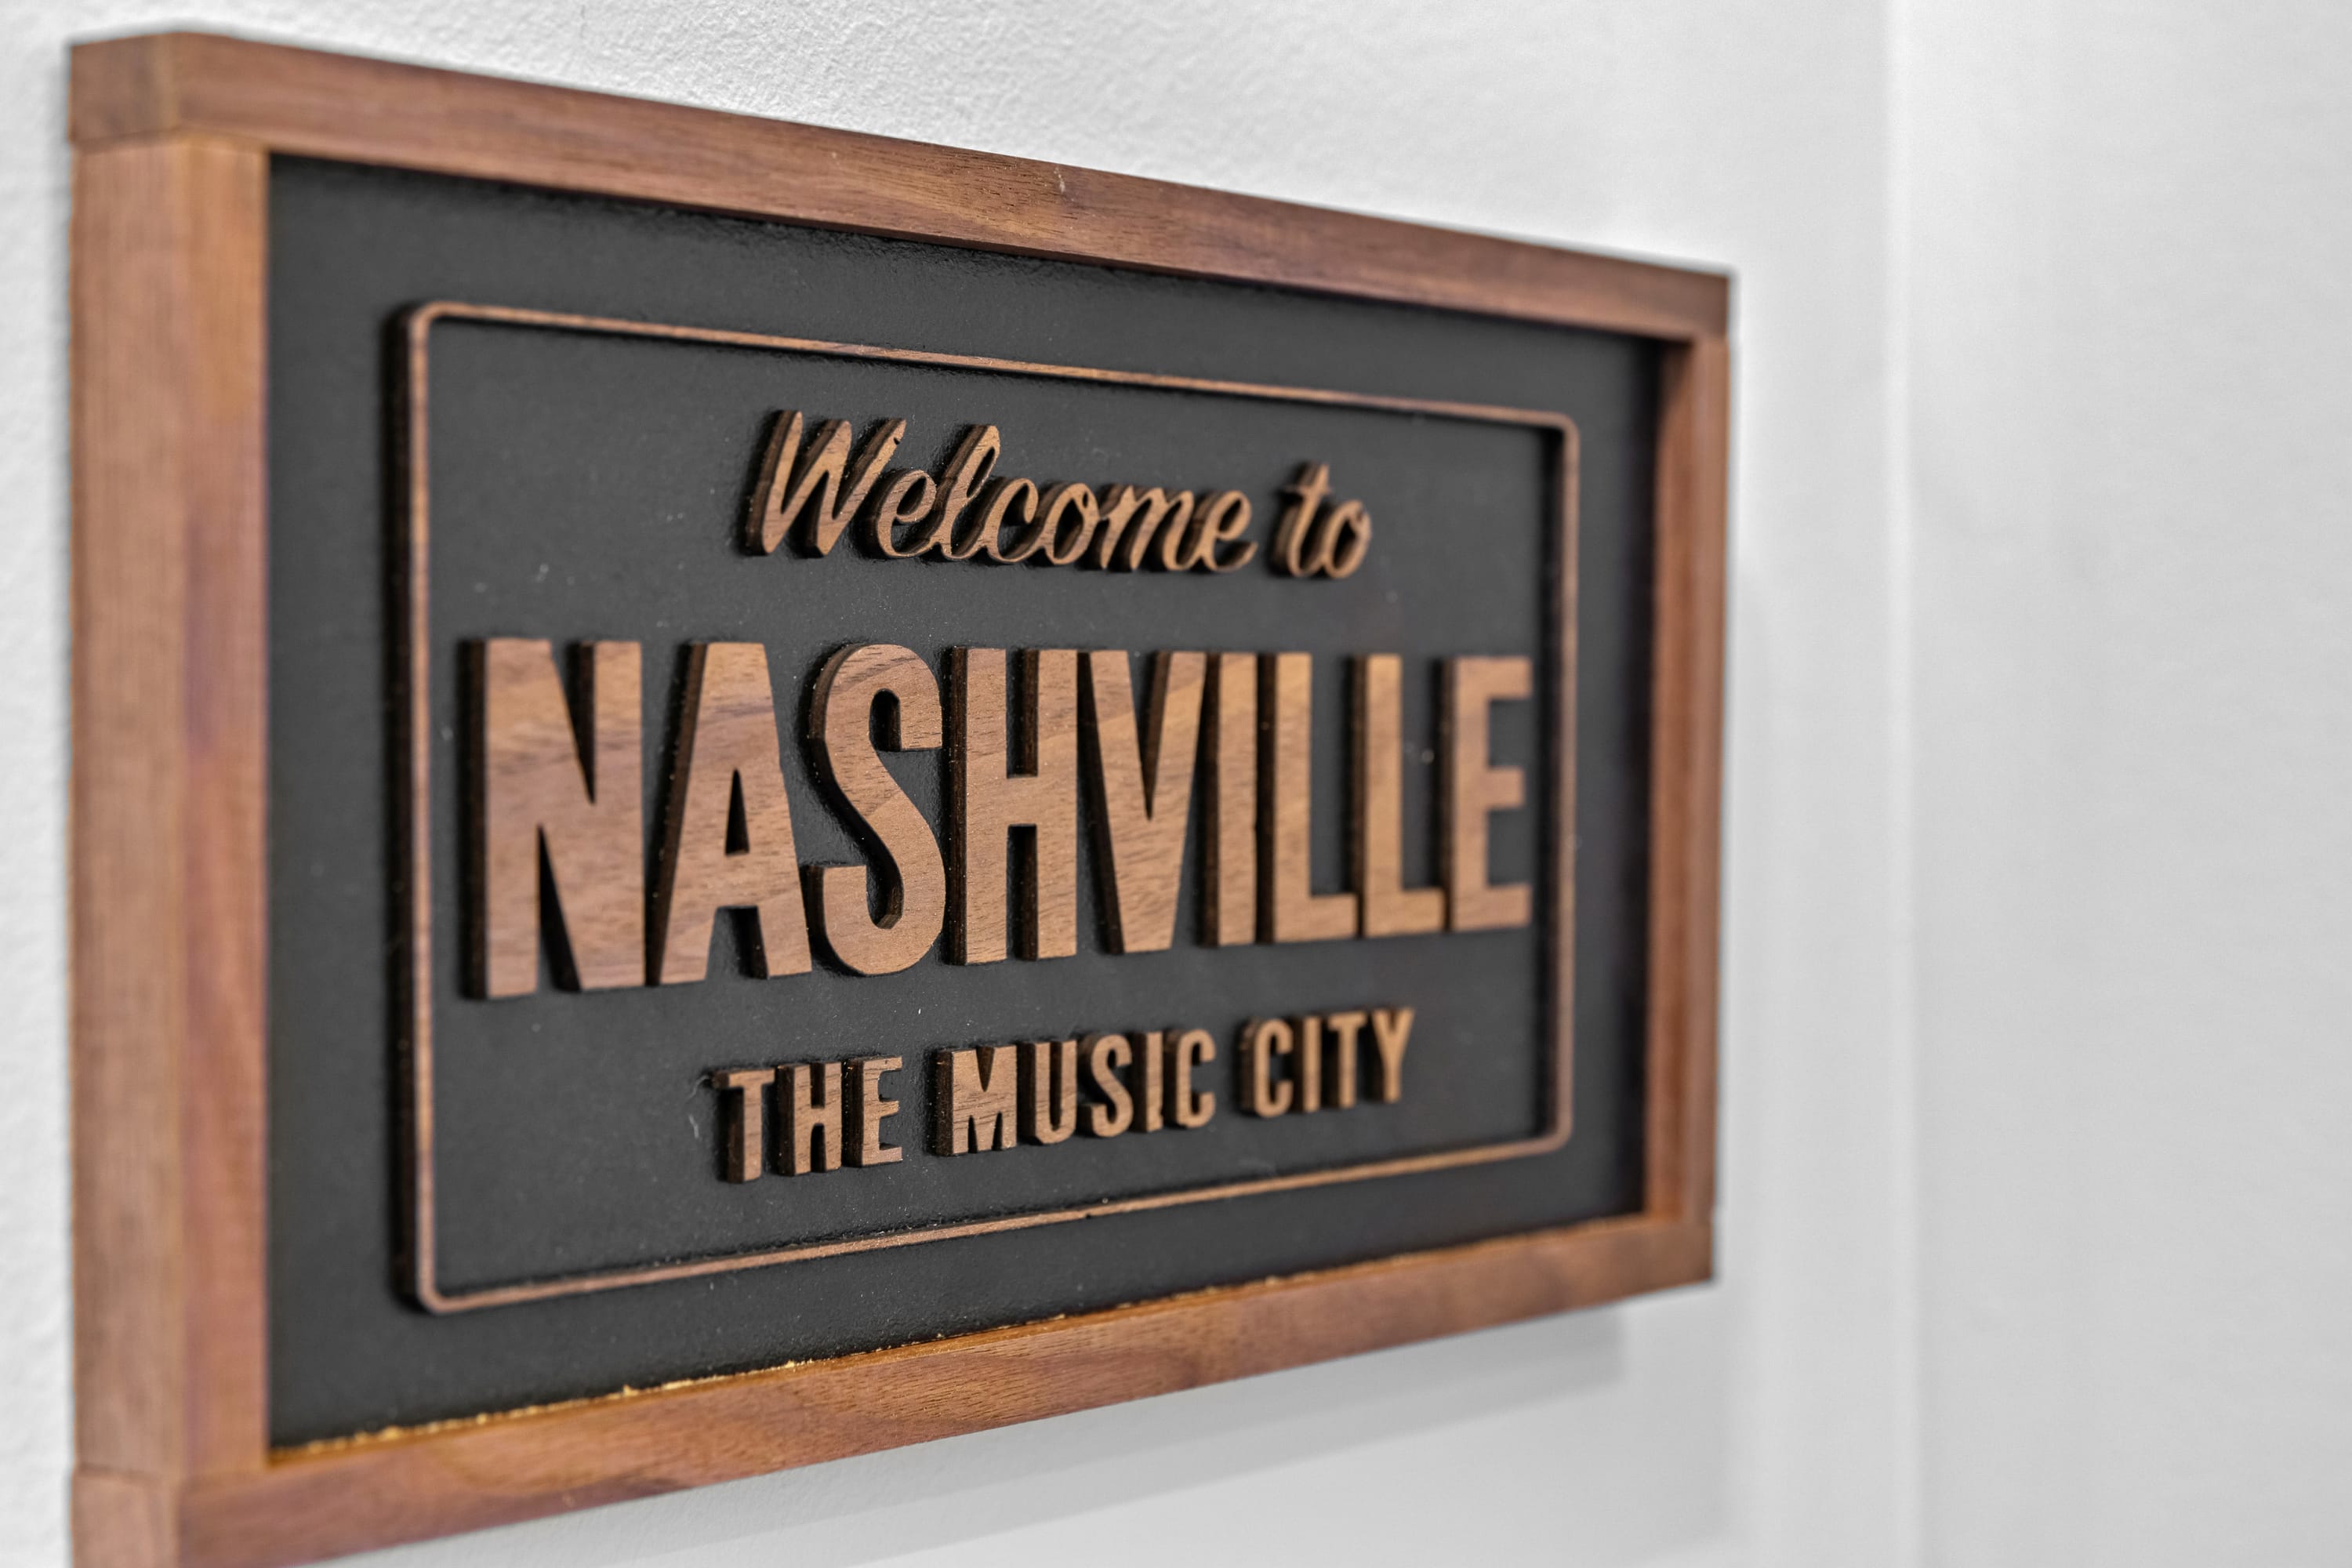 Welcome to Nashville!